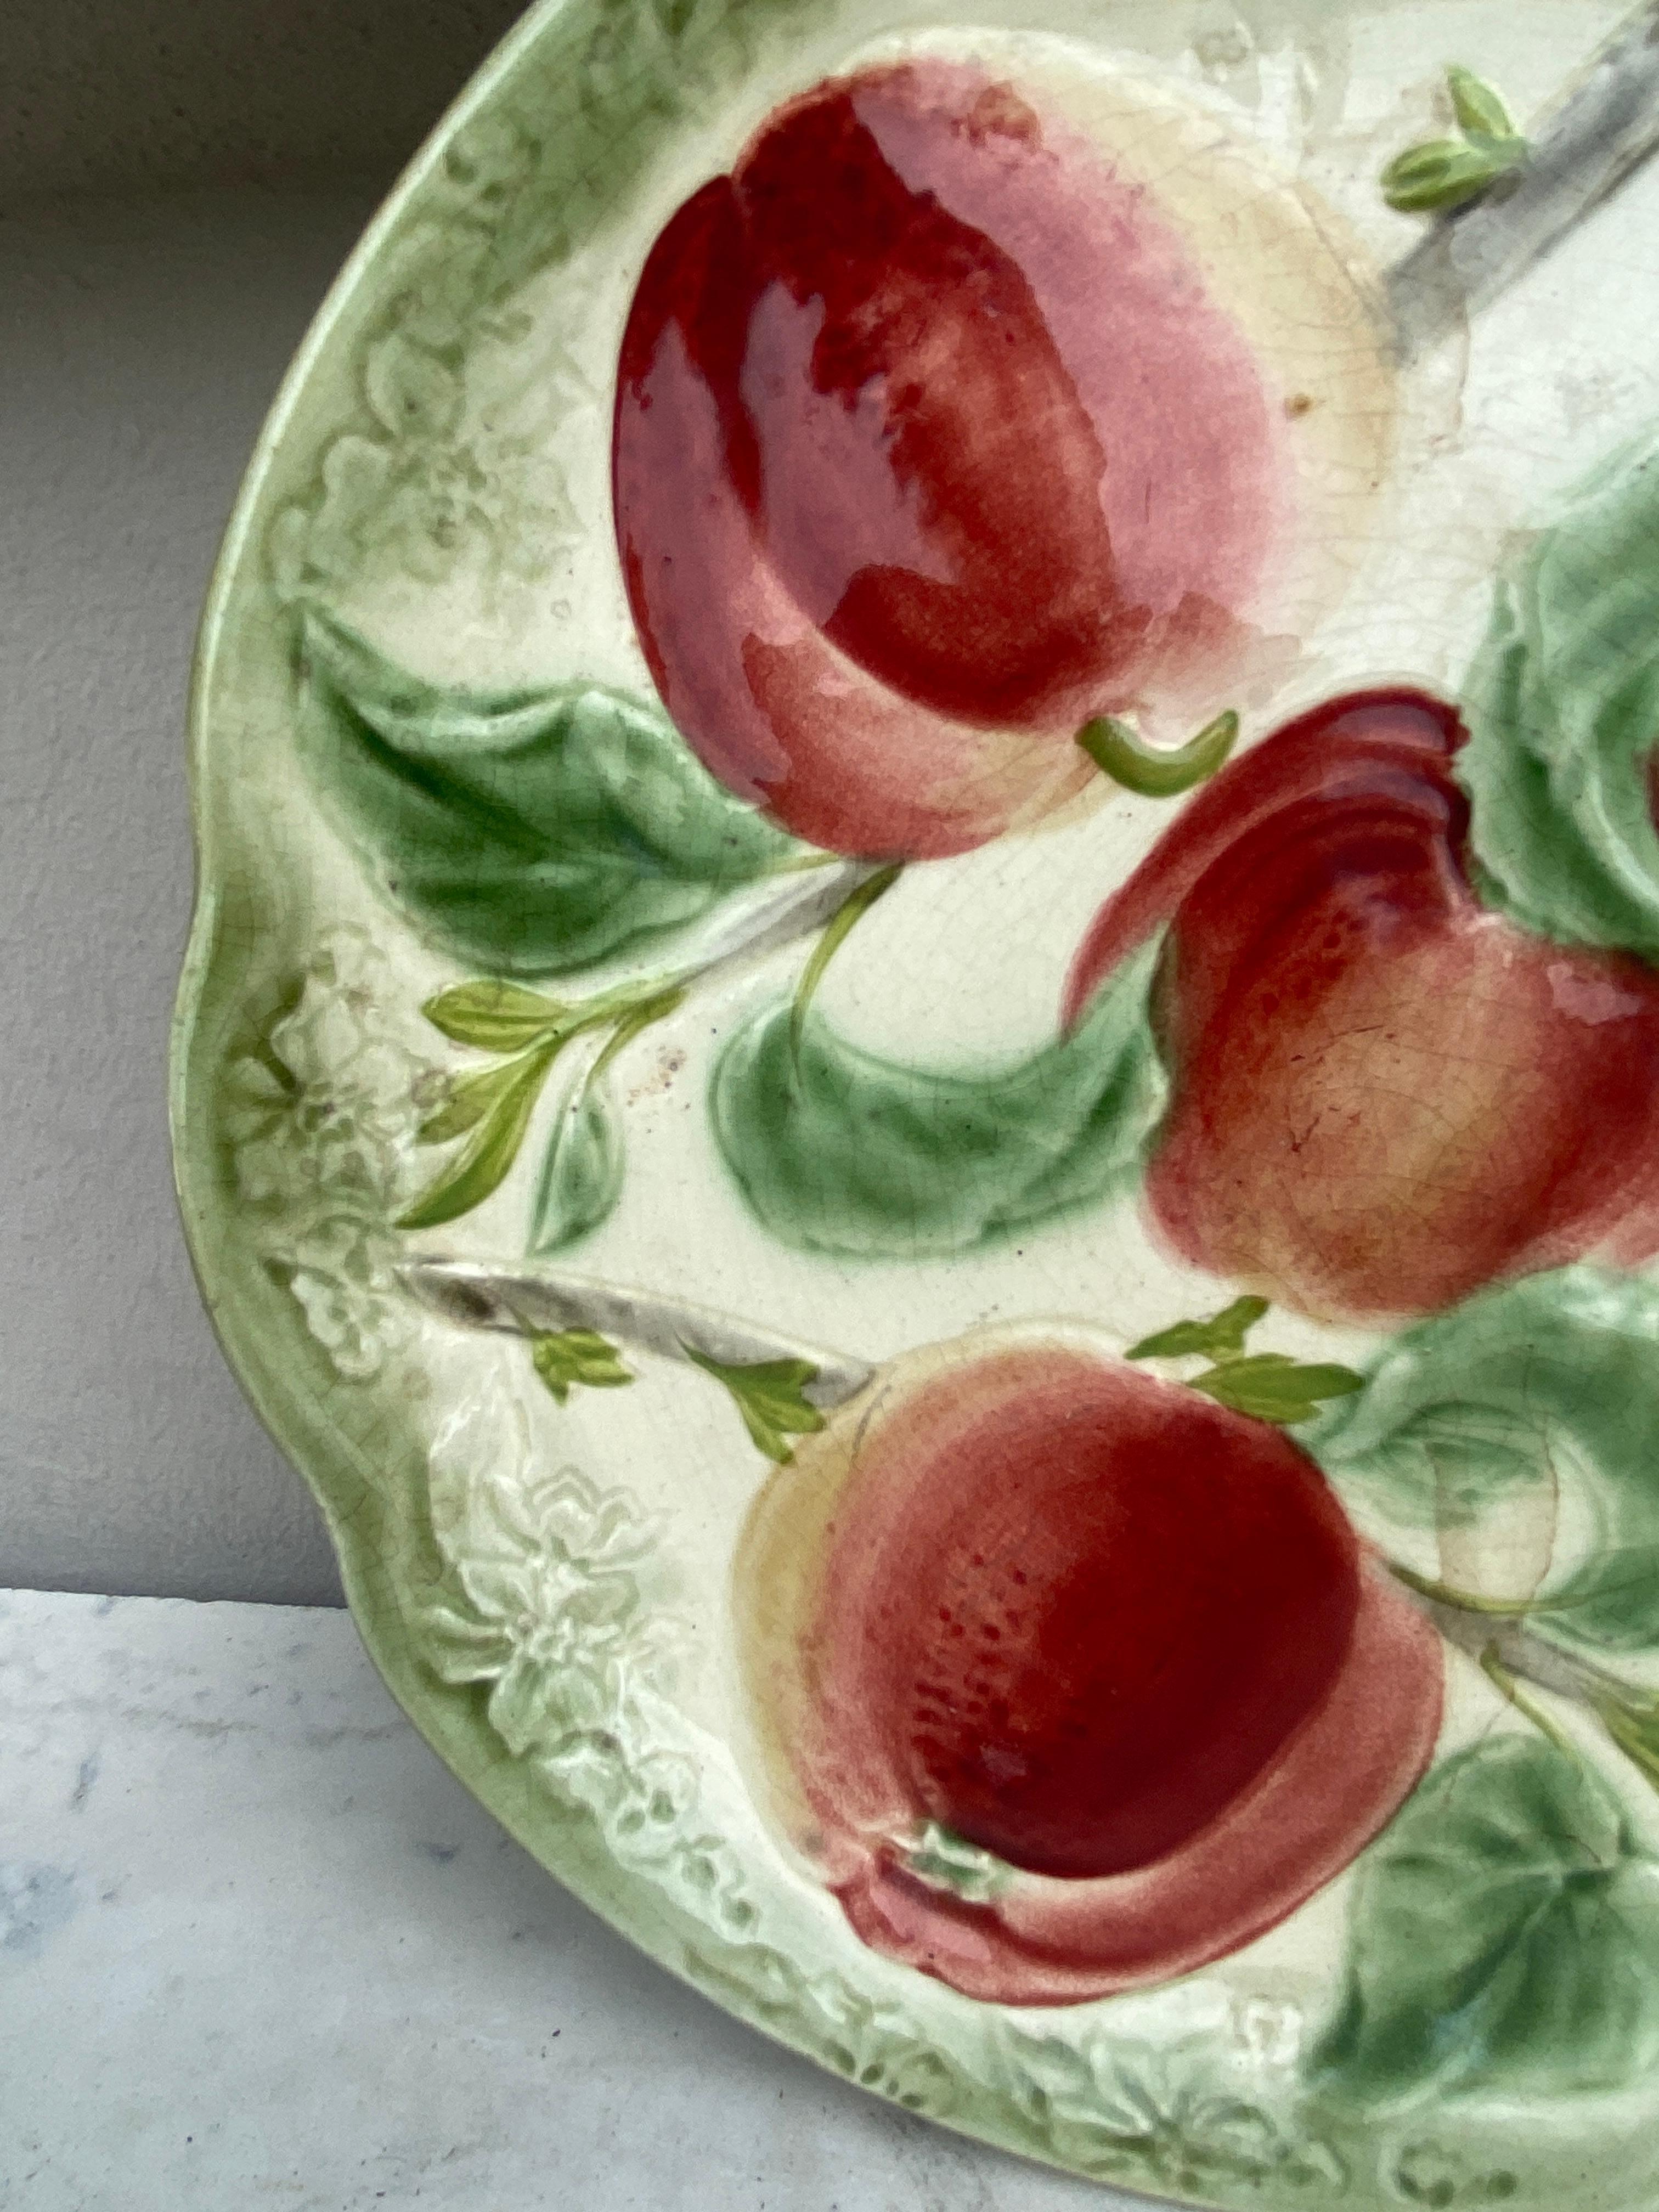 19th century Majolica Apples plate signed Choisy Le Roi.
Made for Higgins & Setter New York.
The Higgins & Seiter Company of New York City began selling decorations for the table, including rich-cut glass in 1887. By 1891 the firm was